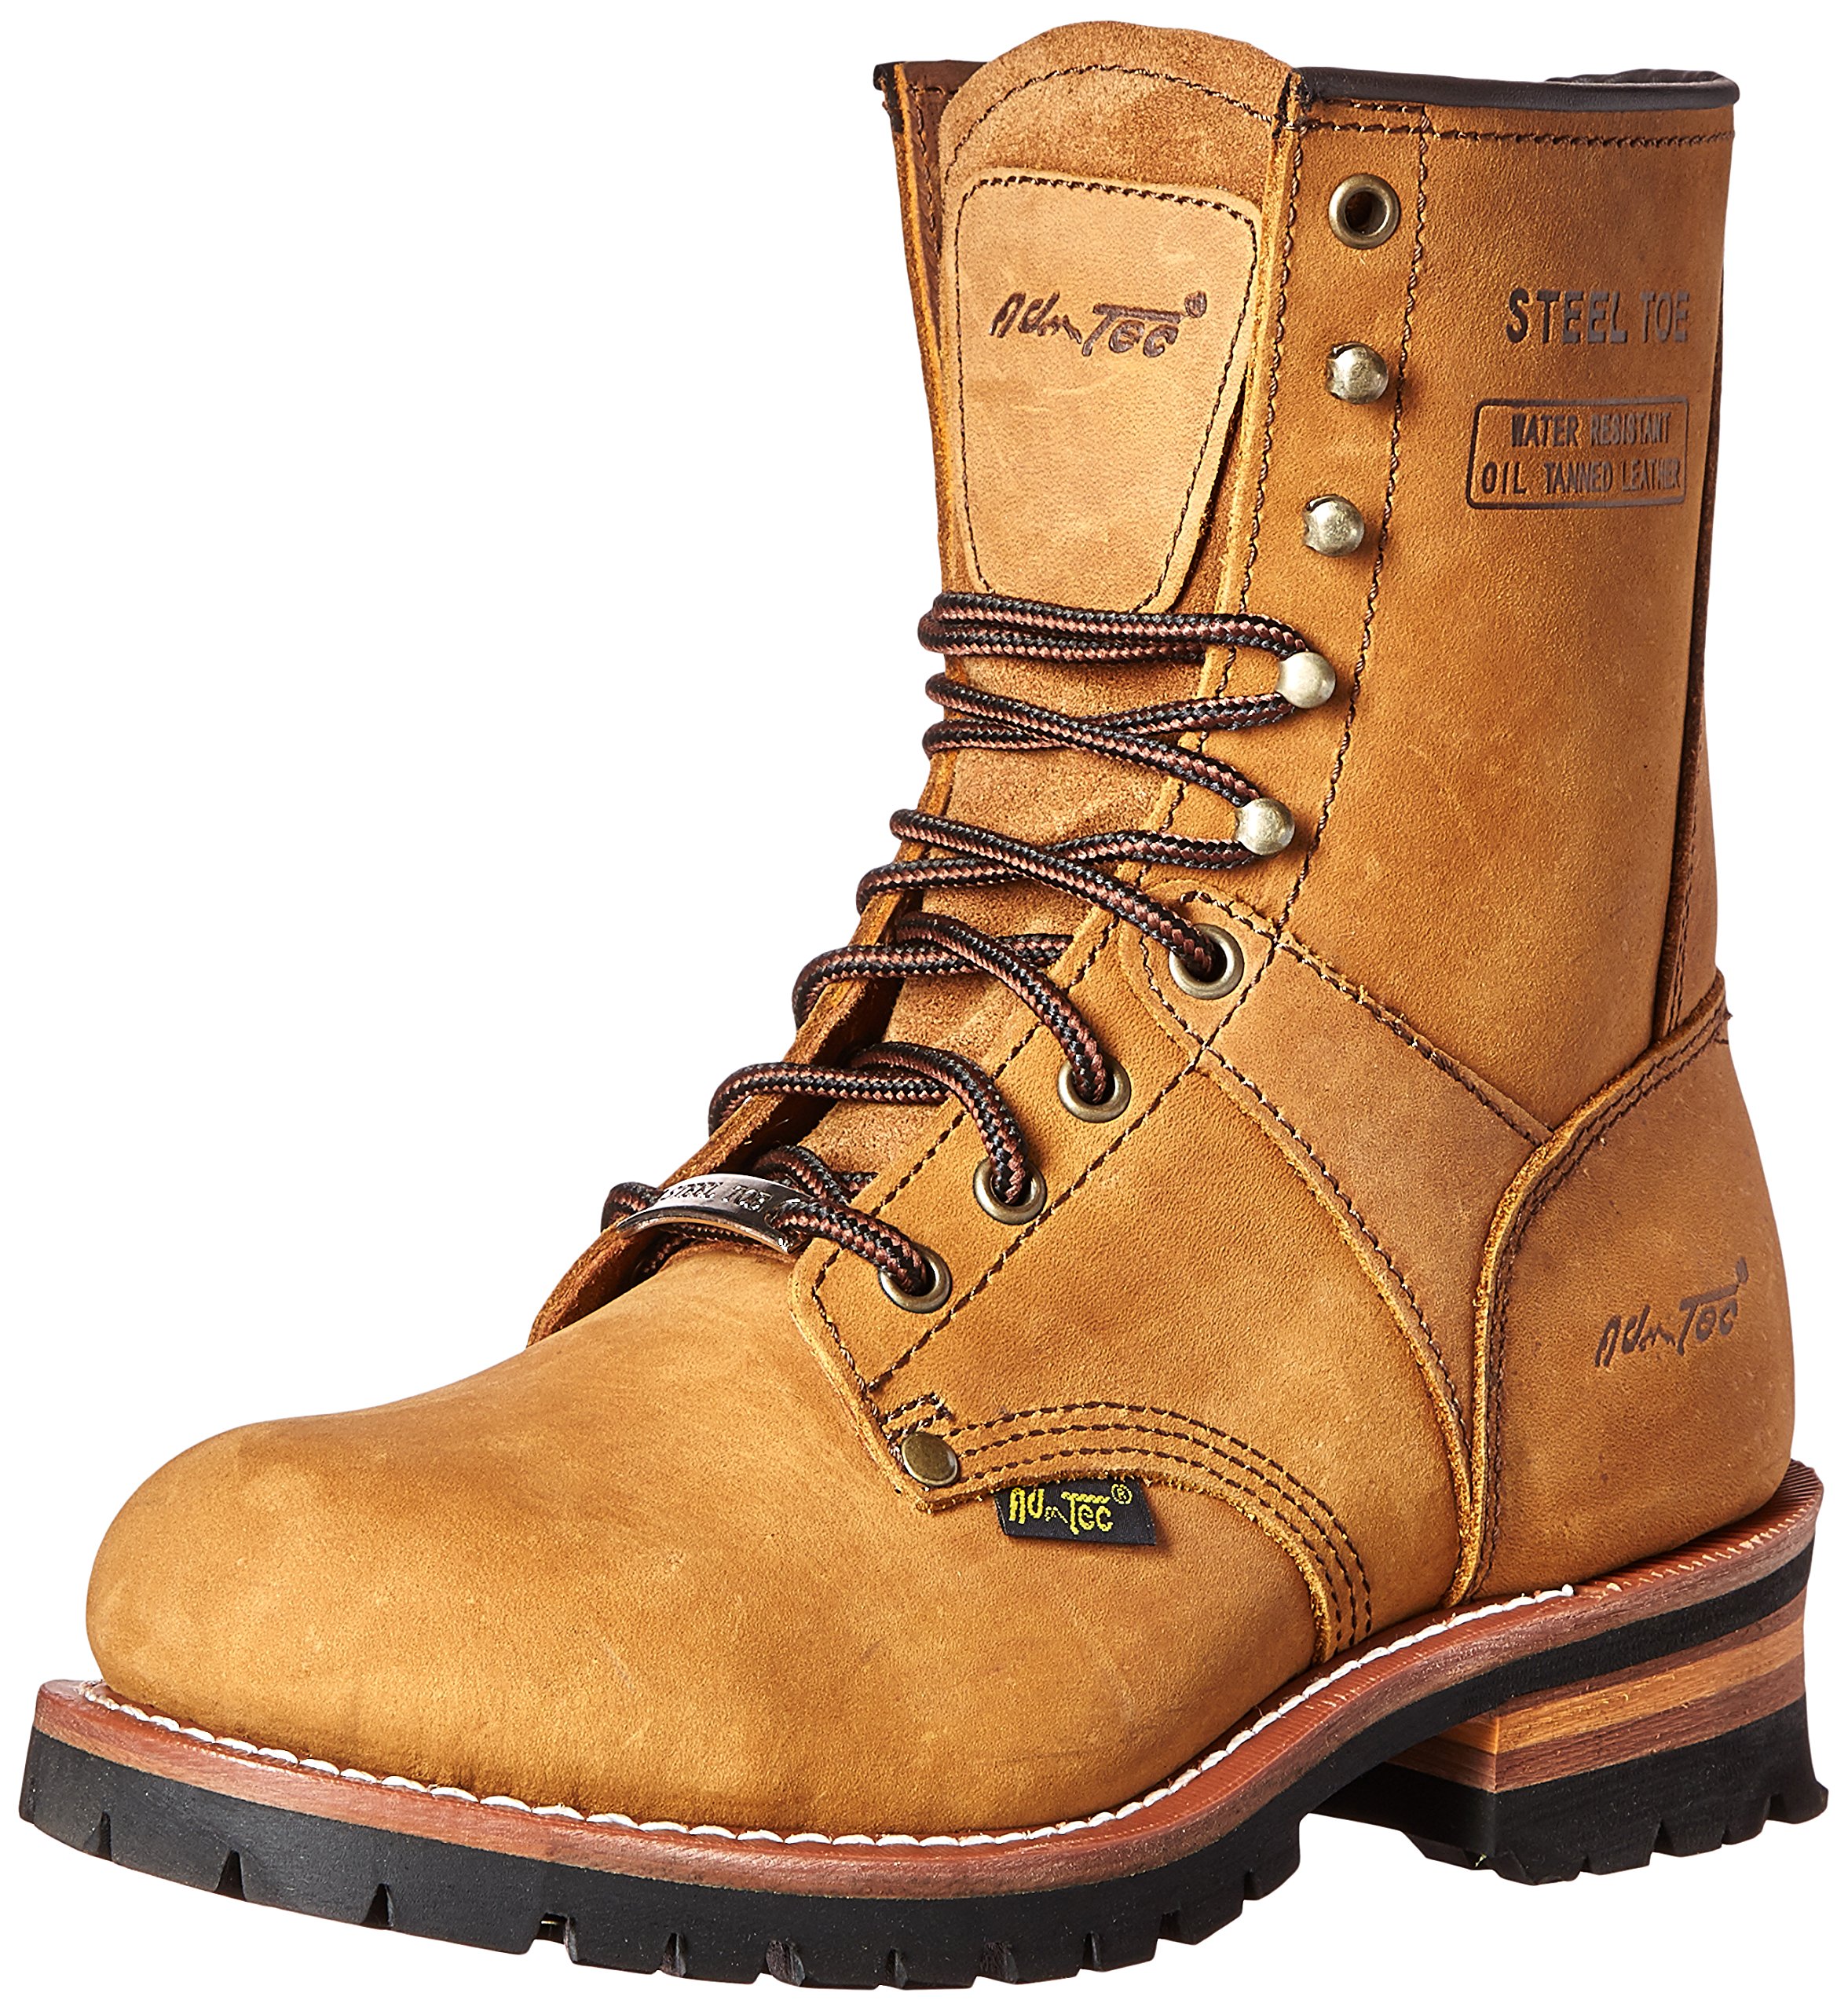 Ad Tec 9in Super Logger Leather Work Boots for Men - Steel Toe, Oil Resistant Lug Sole